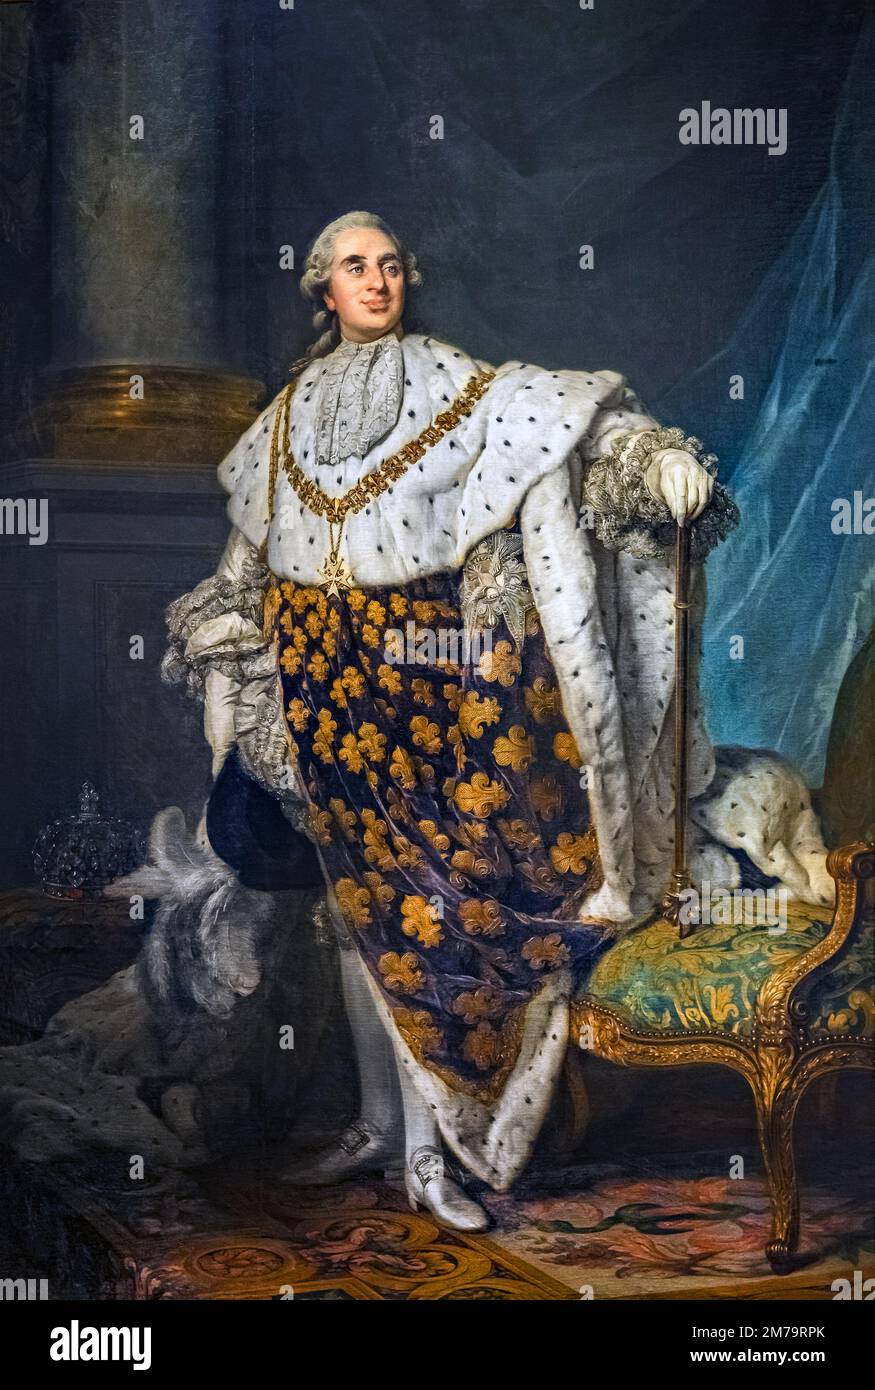 Louis XVI of France, 1775, by Didier Descouens  Louis XVI (1754 – 1793) last King of France before the fall of the monarchy during the French Revolution. Stock Photo